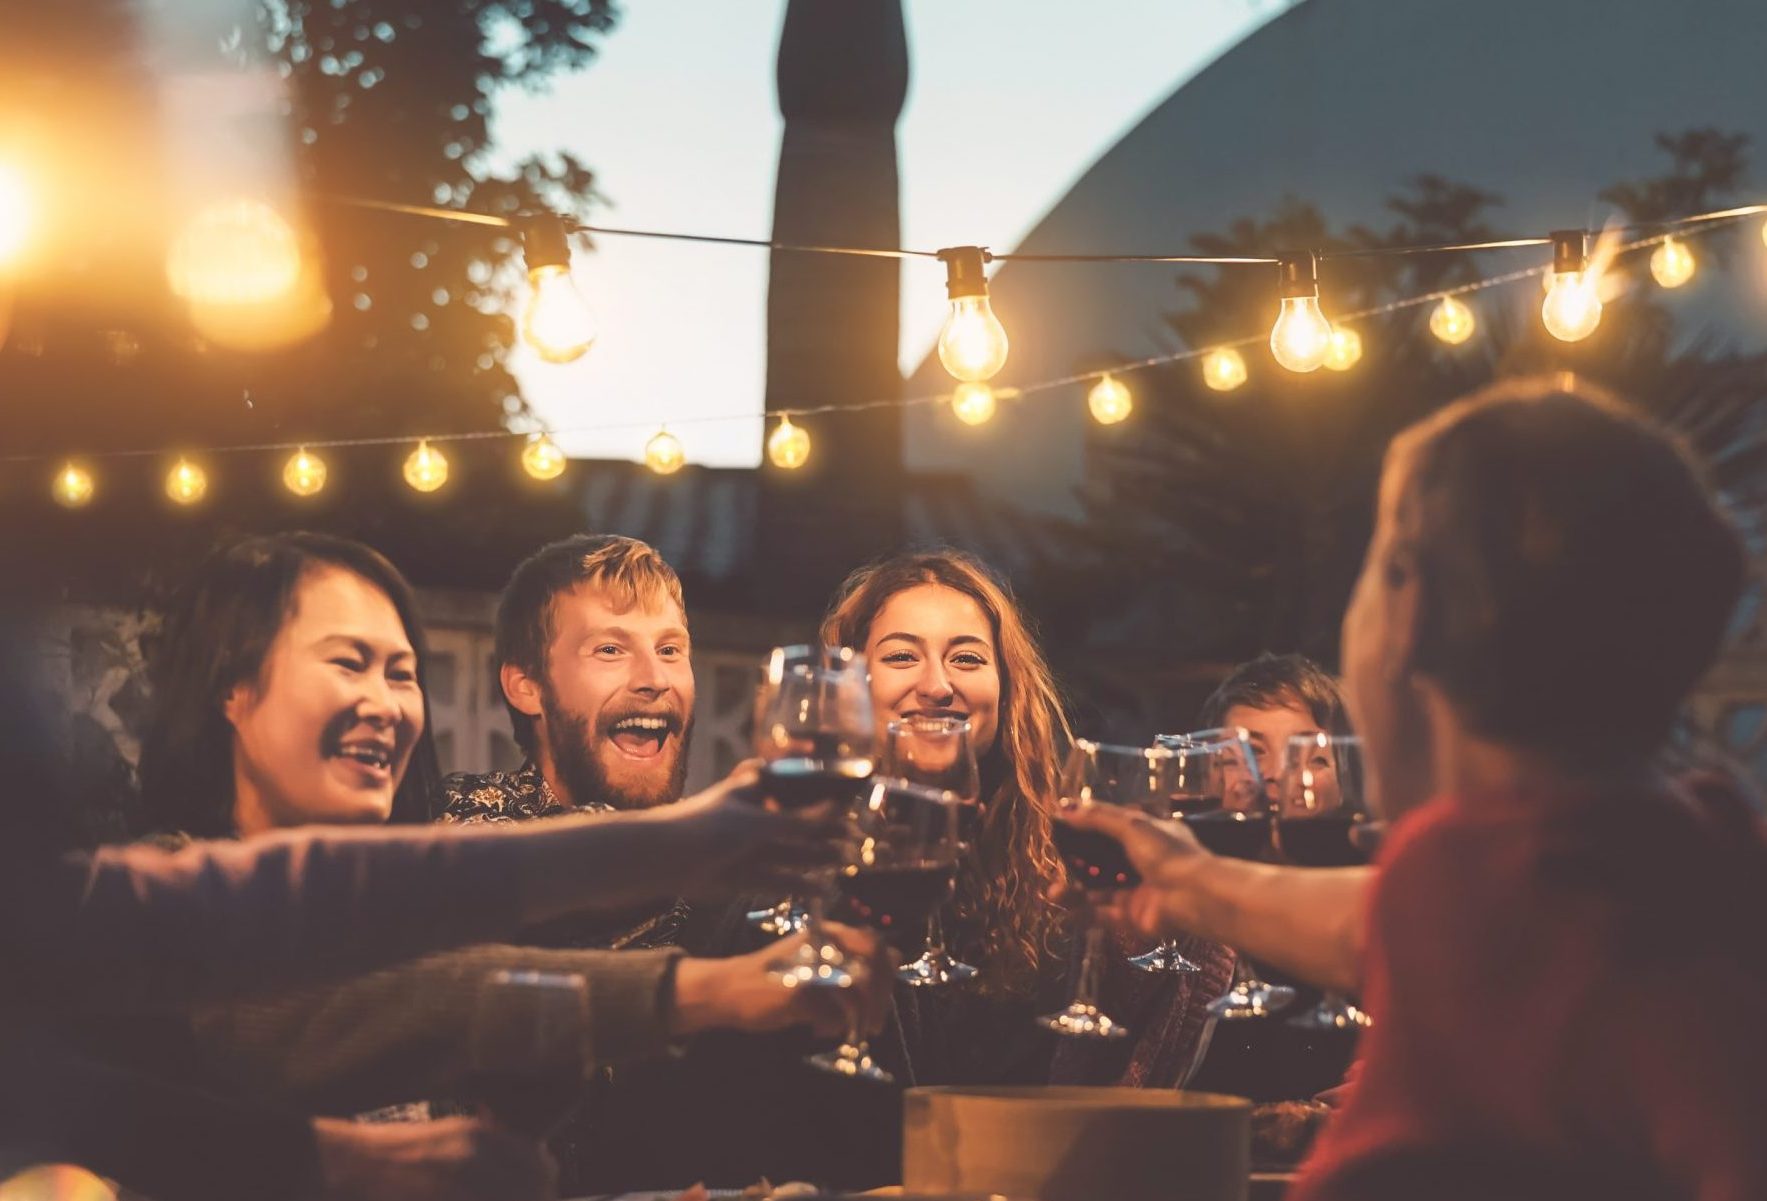 A group of friends celebrating with seamless wine toasts at a dinner party.